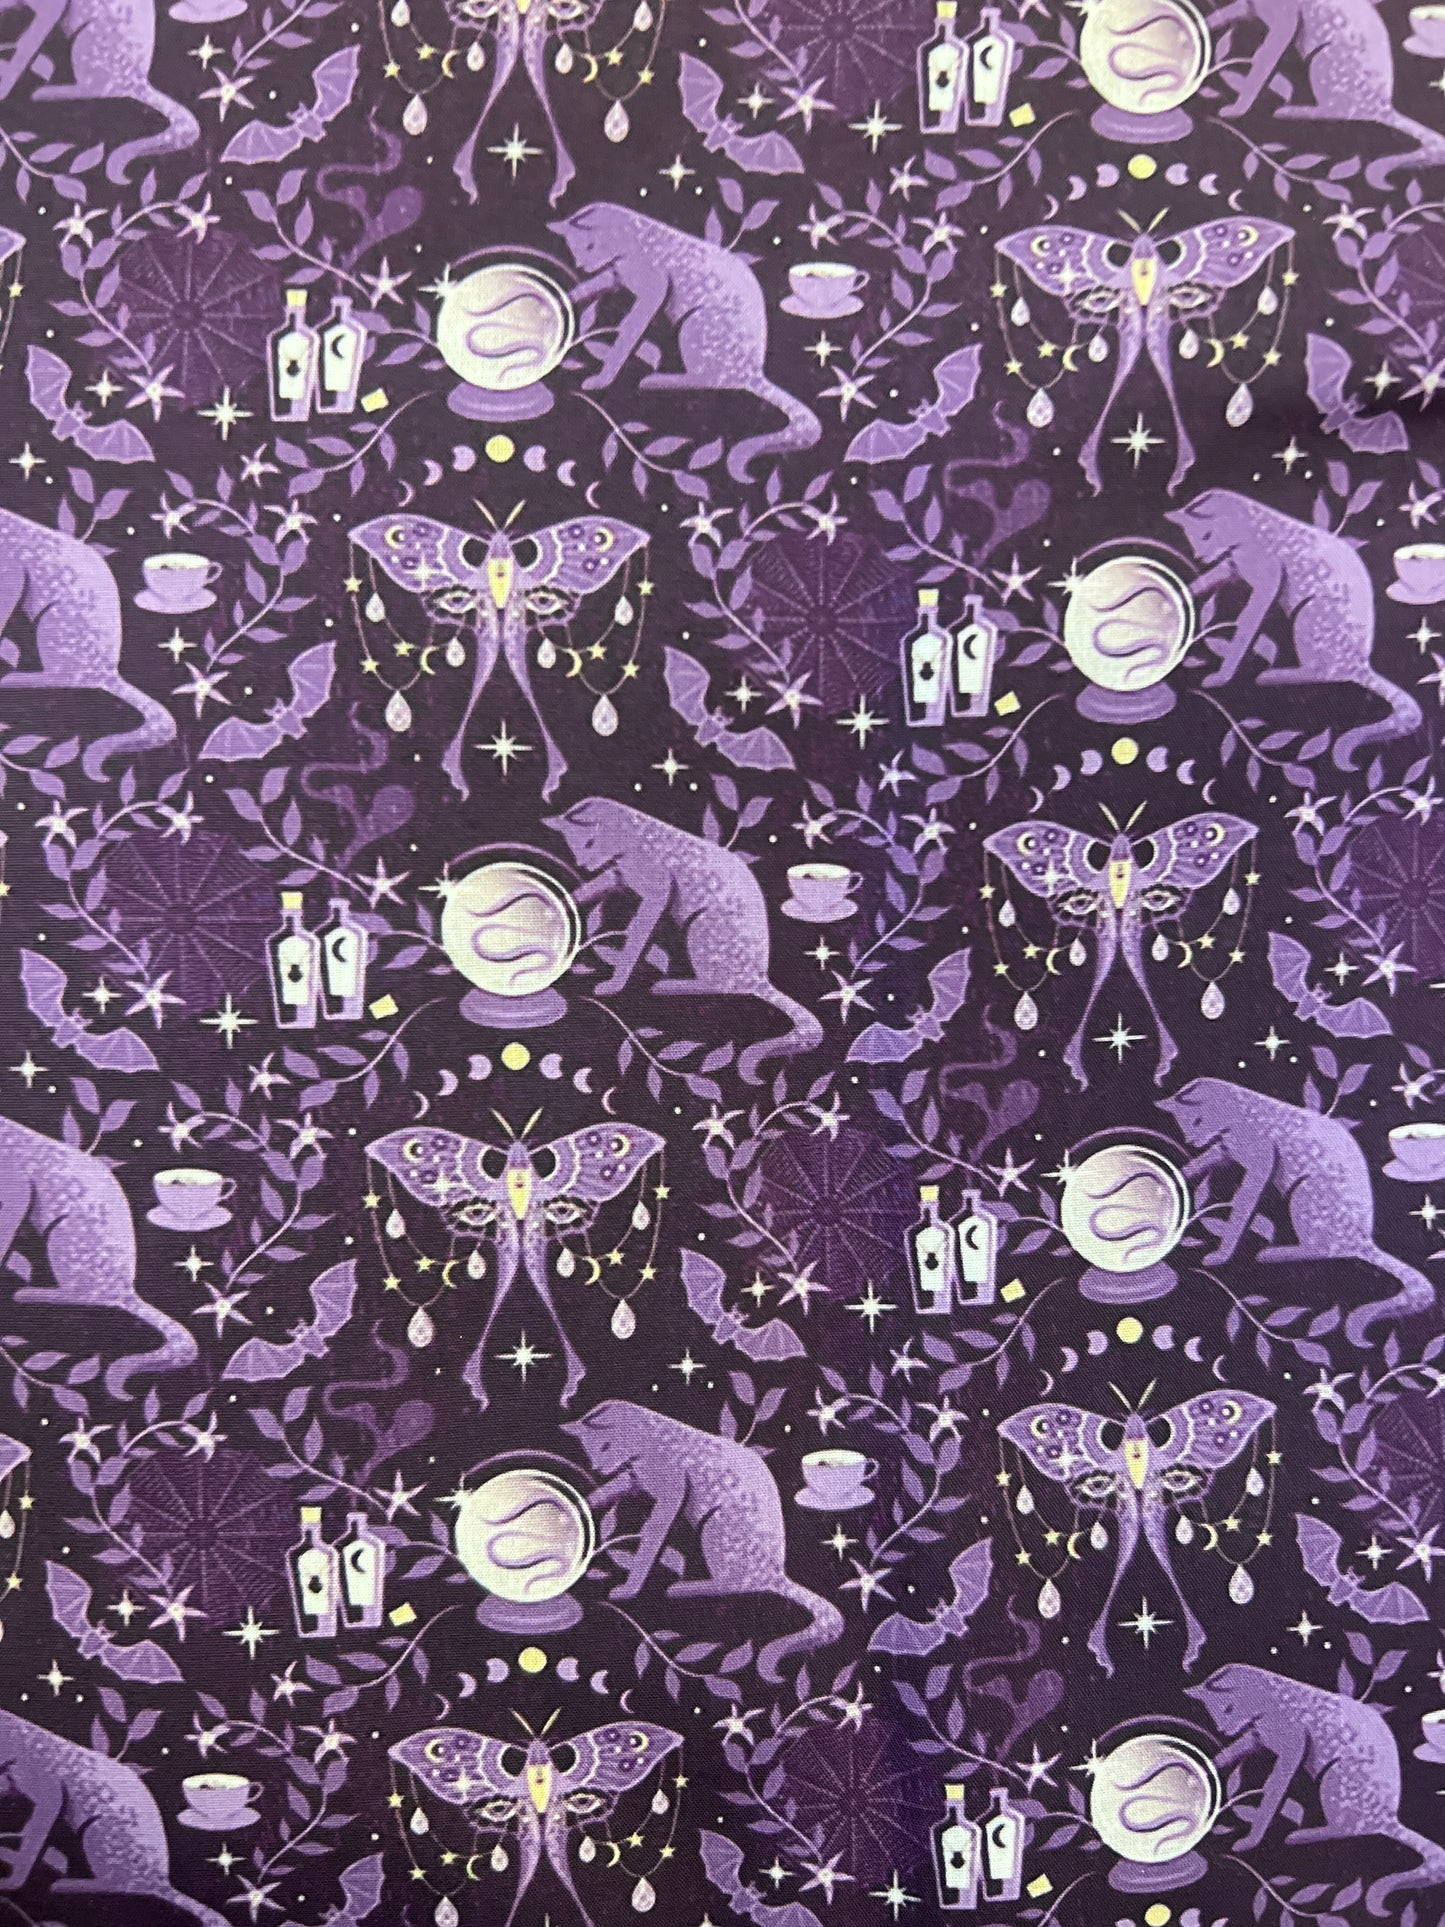 VIOLET MAGIC  - Polycotton Fabric from Japan